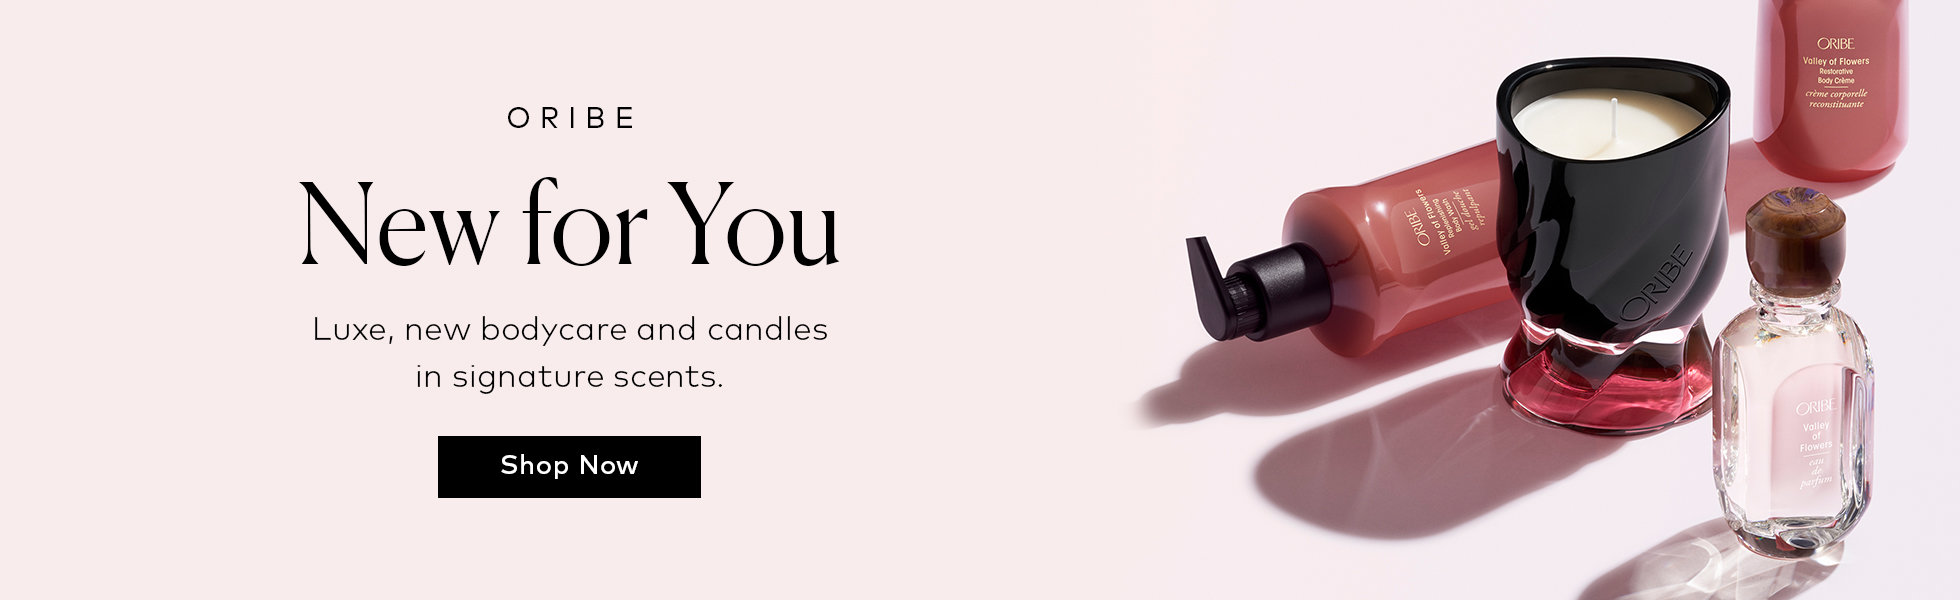 Shop new Oribe Bodycare and Candles now on Beautylish.com